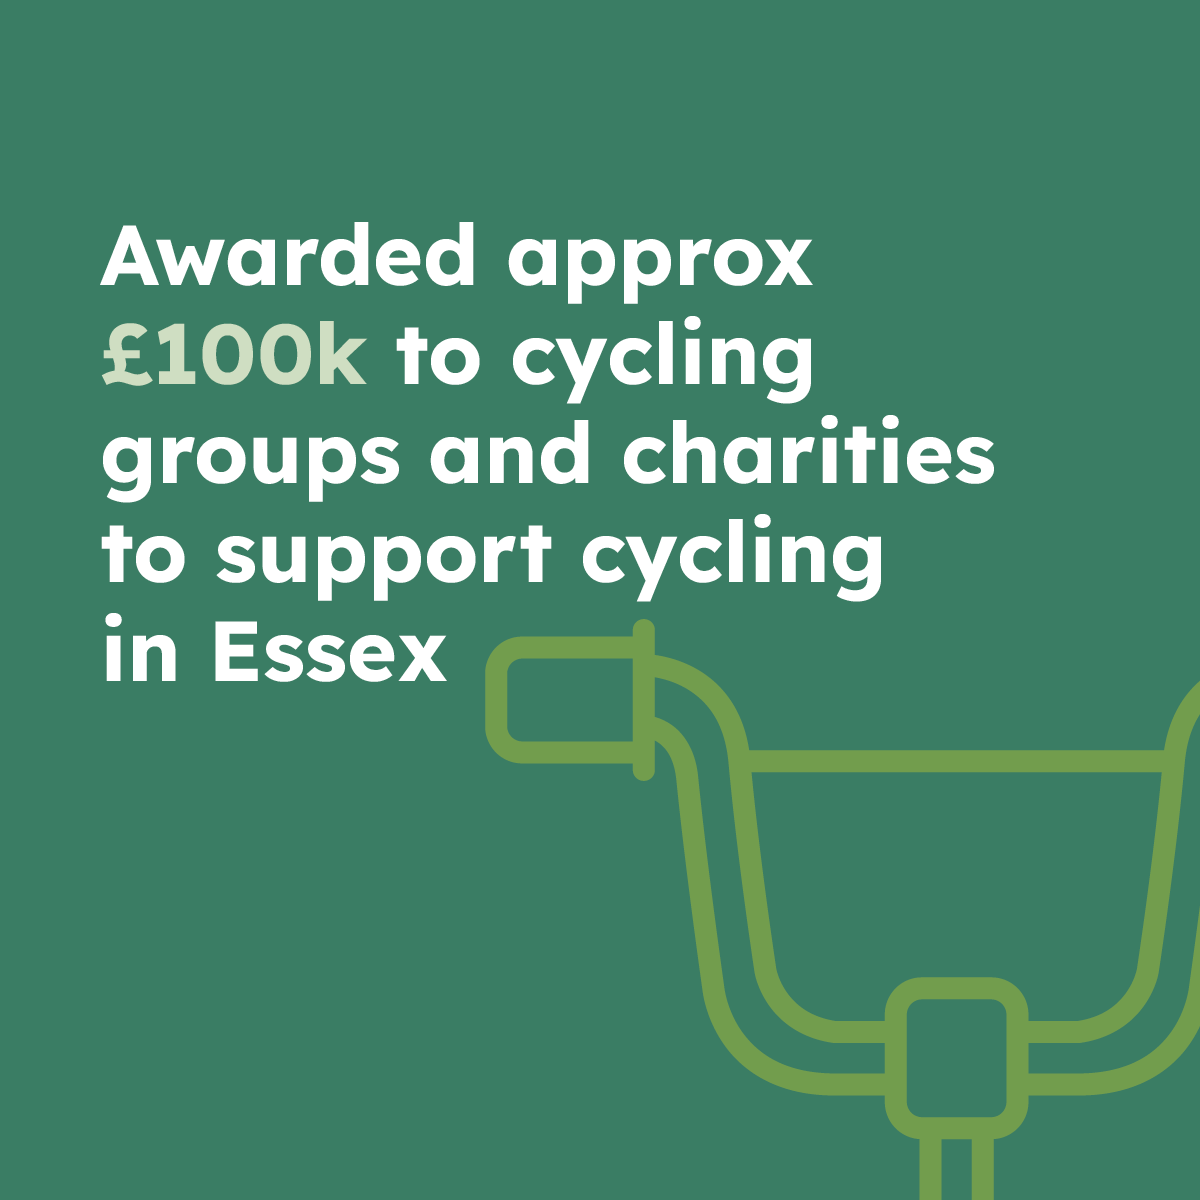 Awarded approx £100k to cycling groups and charities to support cycling in Essex